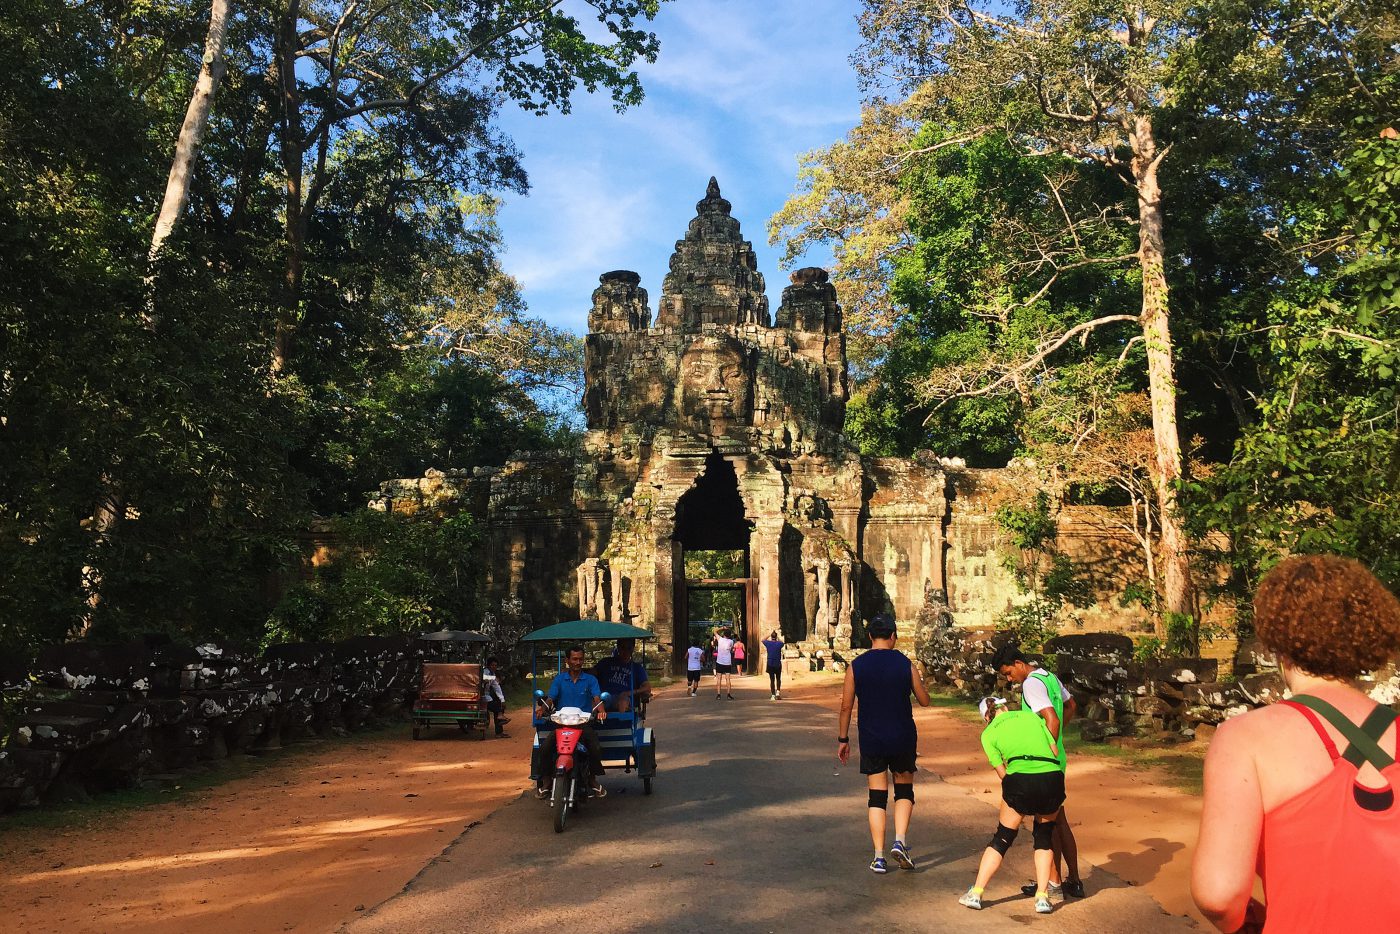 Running through one of the gates in Angkor Wat